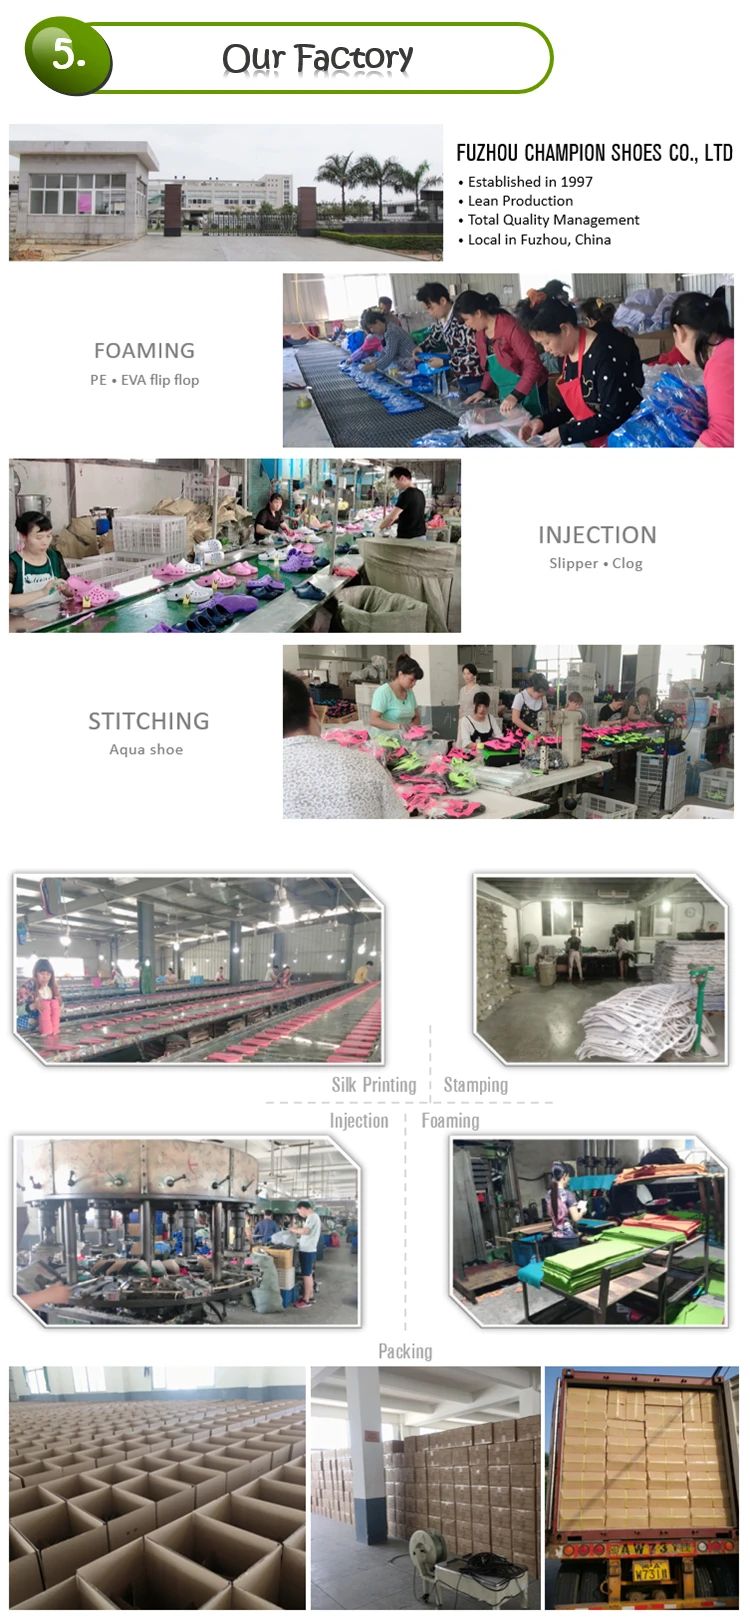 005 our factory.jpg